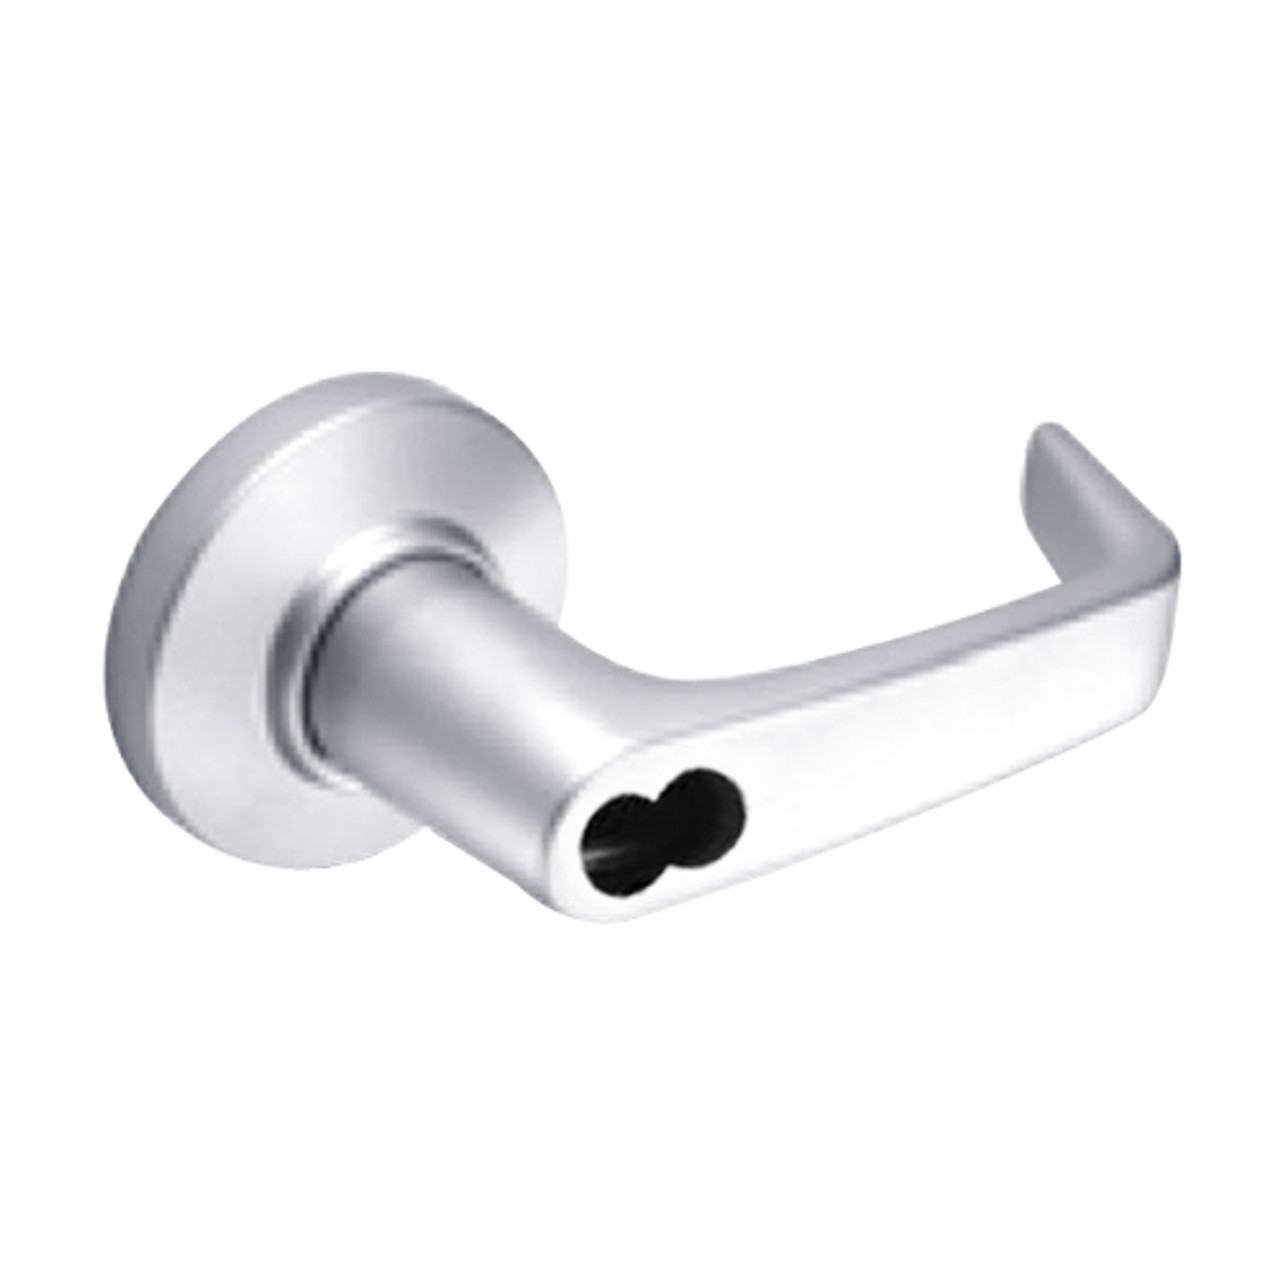 9K37A15CS3625LM Best 9K Series Dormitory or Storeroom Cylindrical Lever Locks with Contour Angle with Return Lever Design Accept 7 Pin Best Core in Bright Chrome